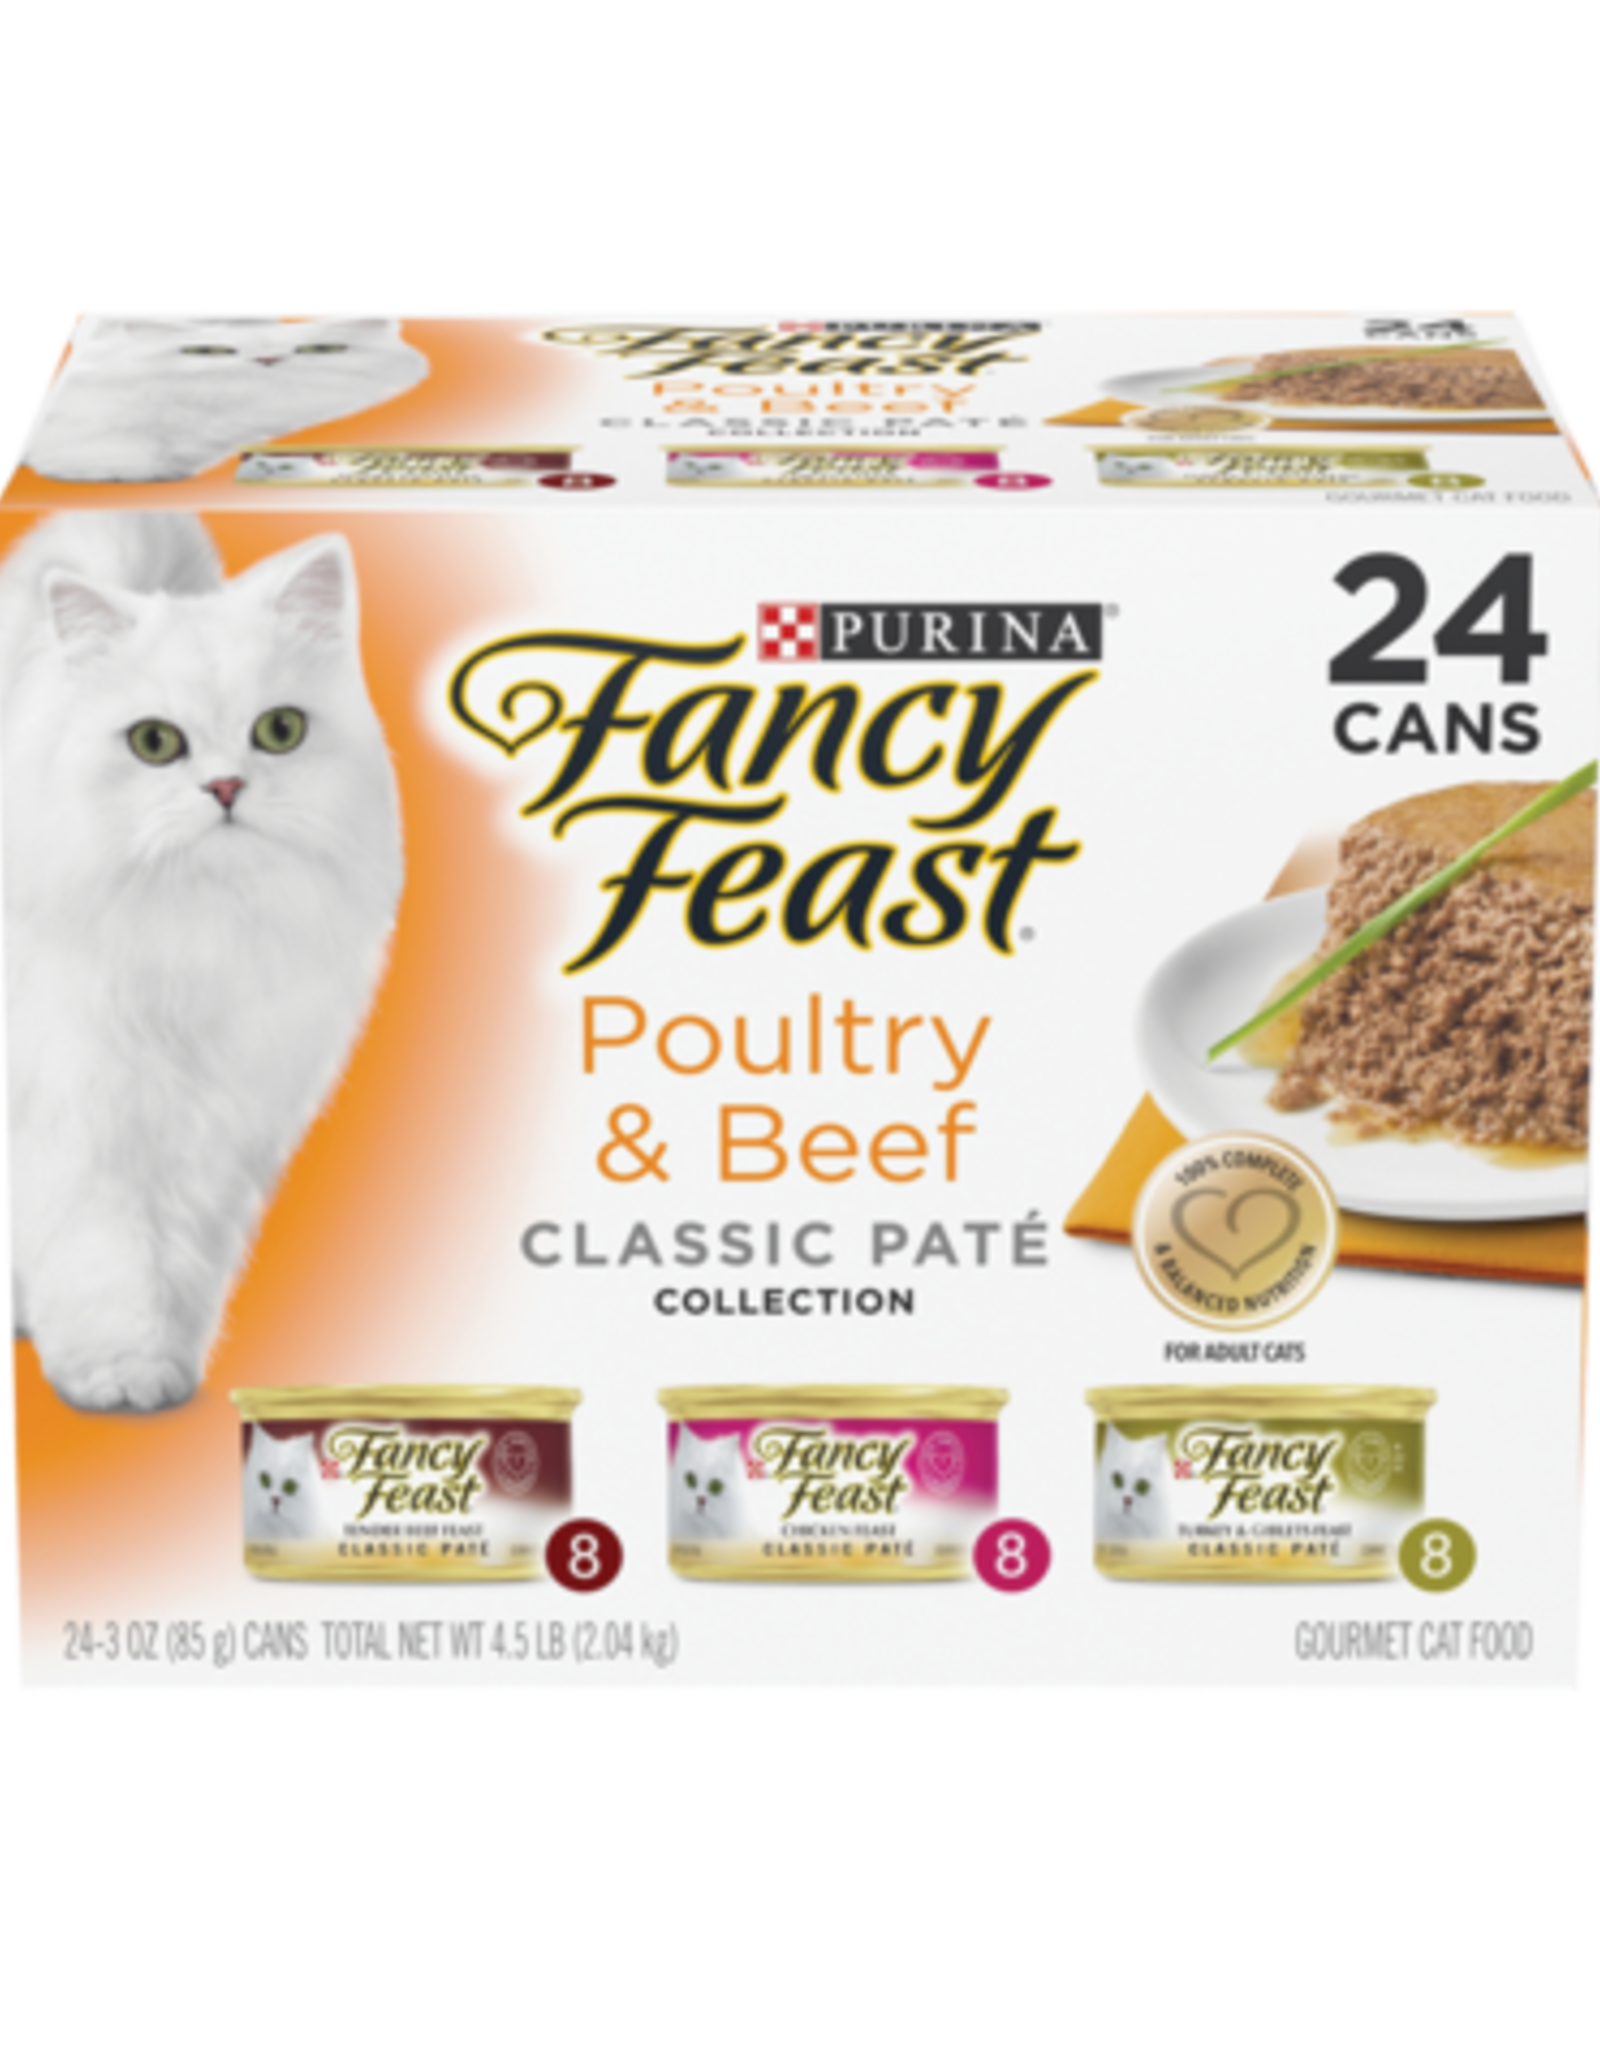 NESTLE PURINA PETCARE FANCY FEAST POULTRY & BEEF CLASSIC PATE VARIETY CANS 24 PACK